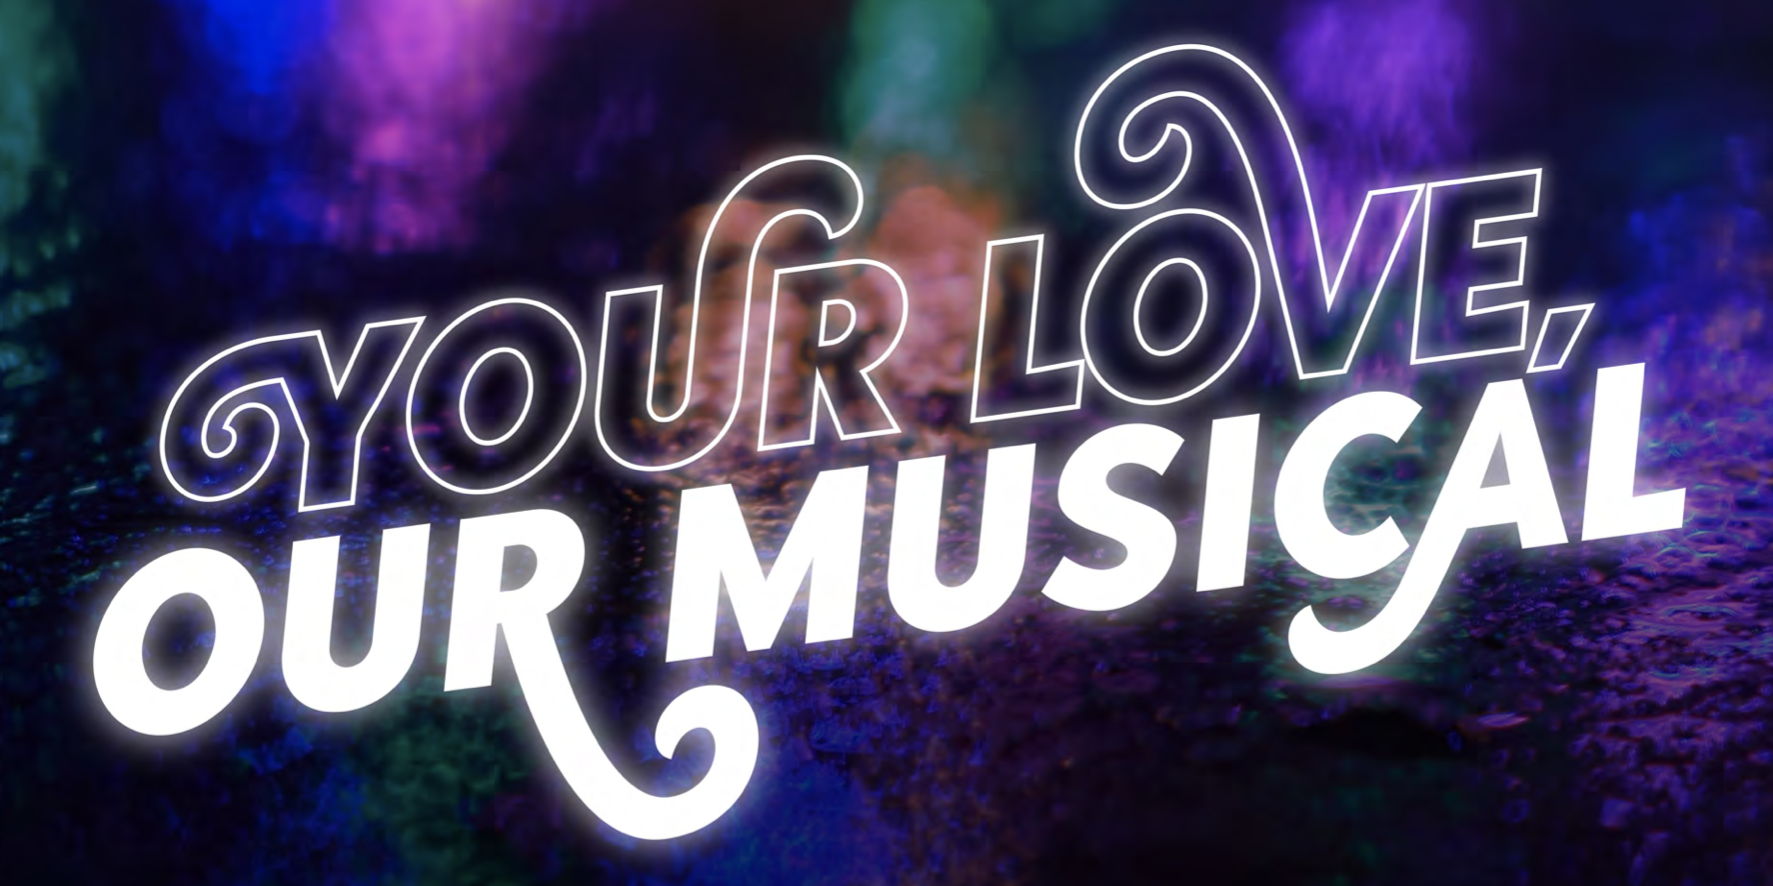 YOUR LOVE, OUR MUSICAL promotional image